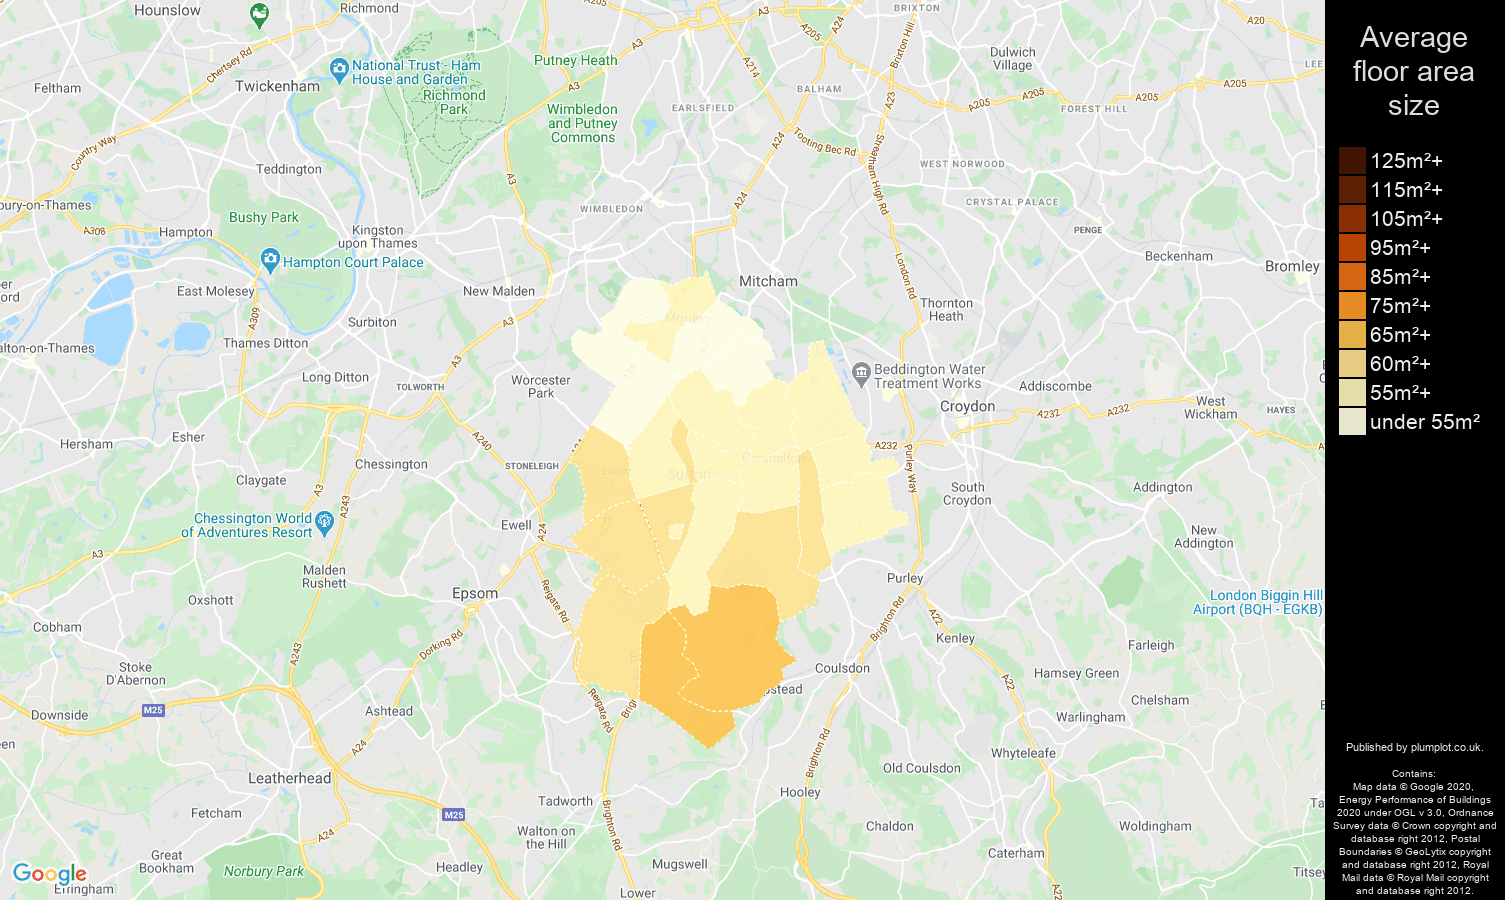 Sutton map of average floor area size of flats